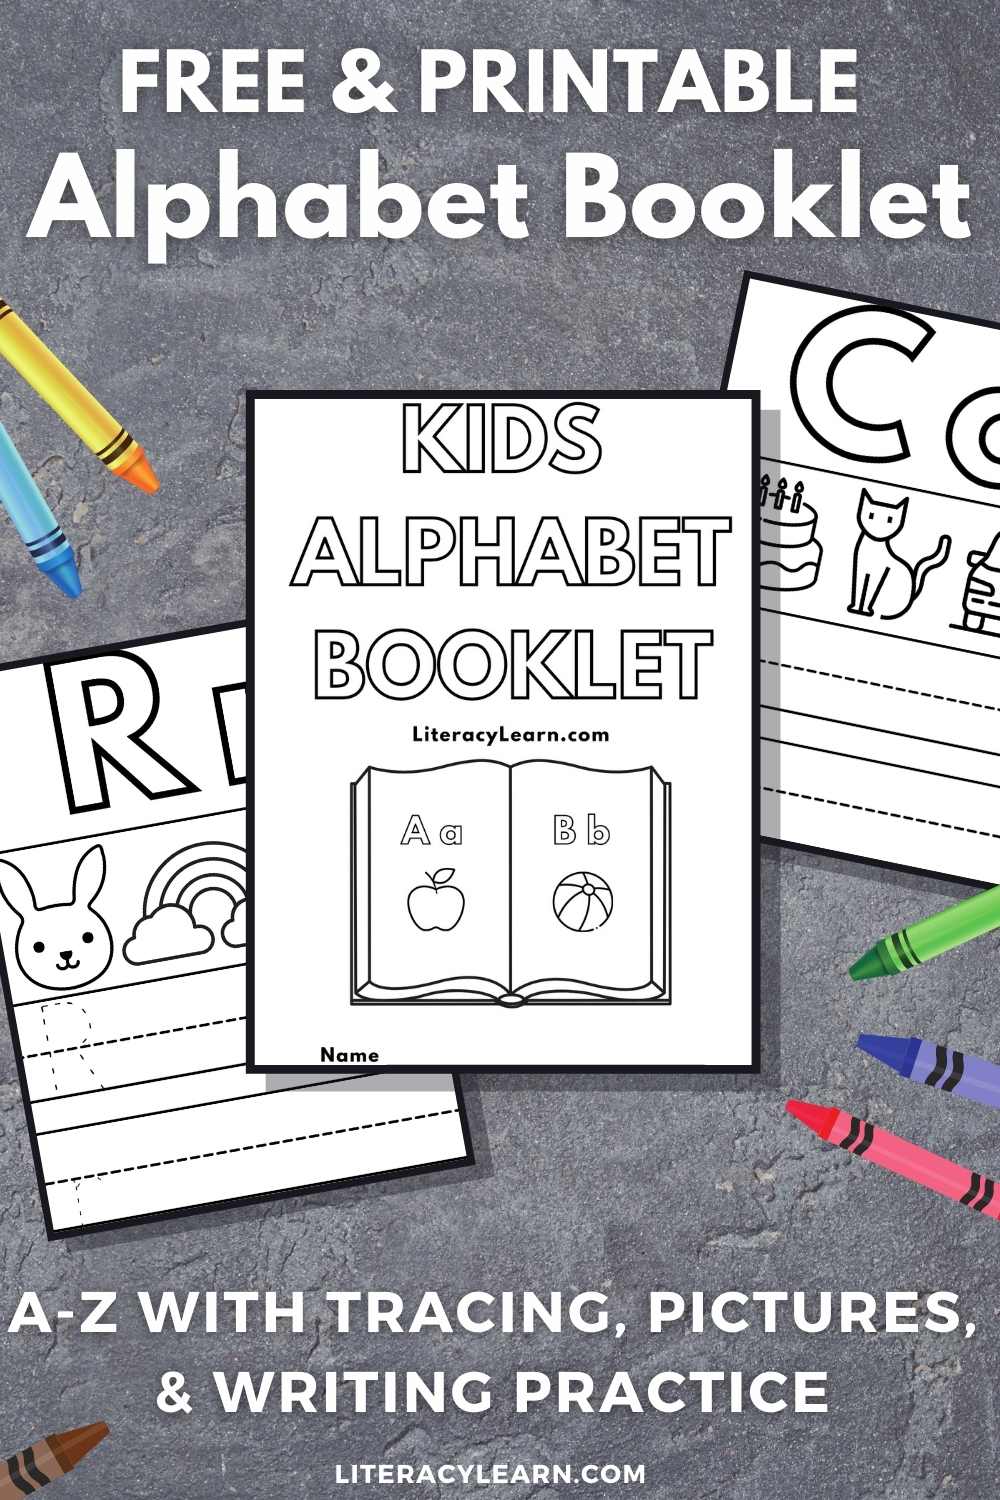 Printable Alphabet Book for Kids Free Download Literacy Learn